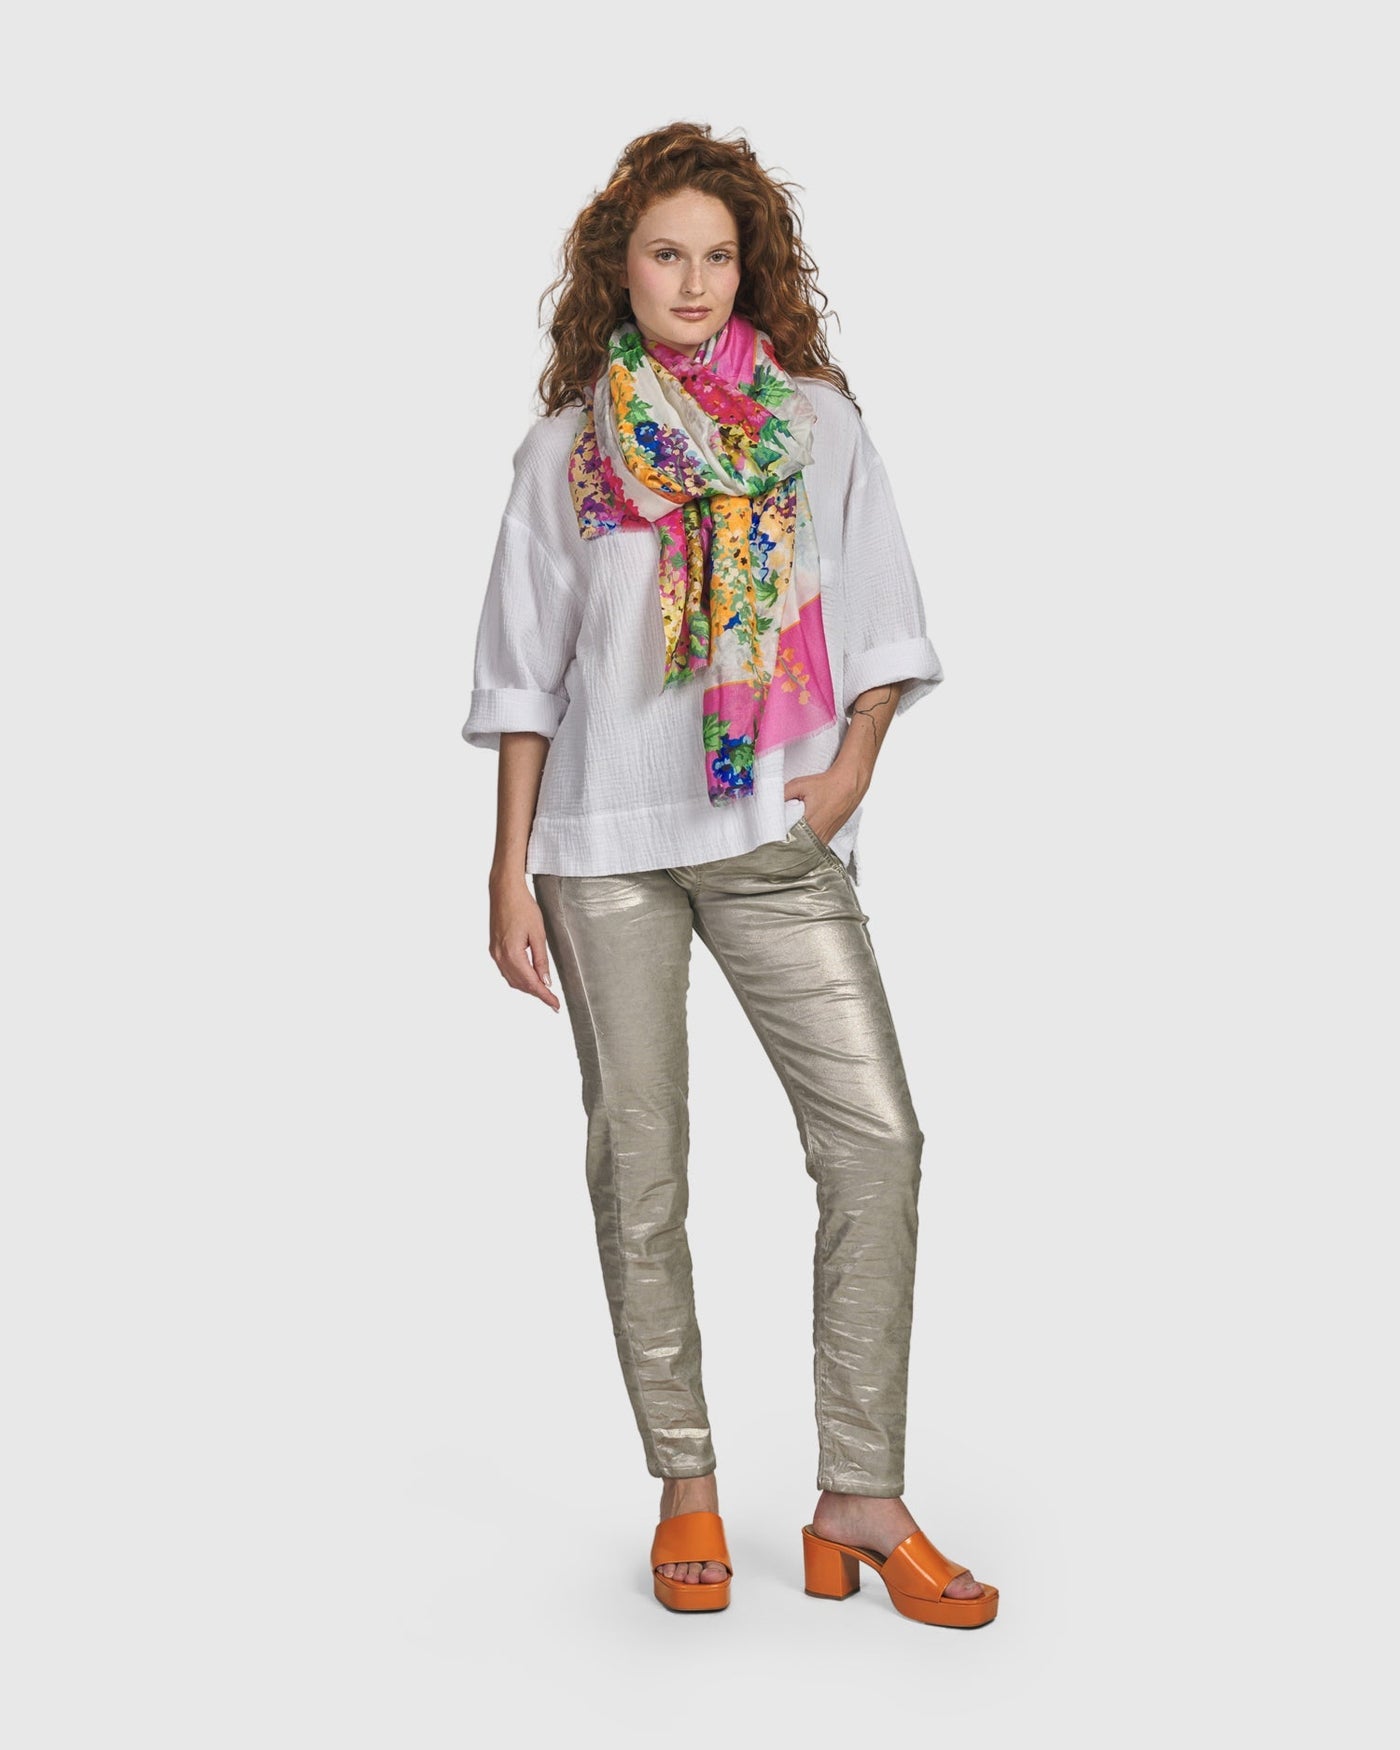 A woman wearing ALEMBIKA's Iconic Stretch Jeans in Metallic Luster with a drawstring stretch waist.